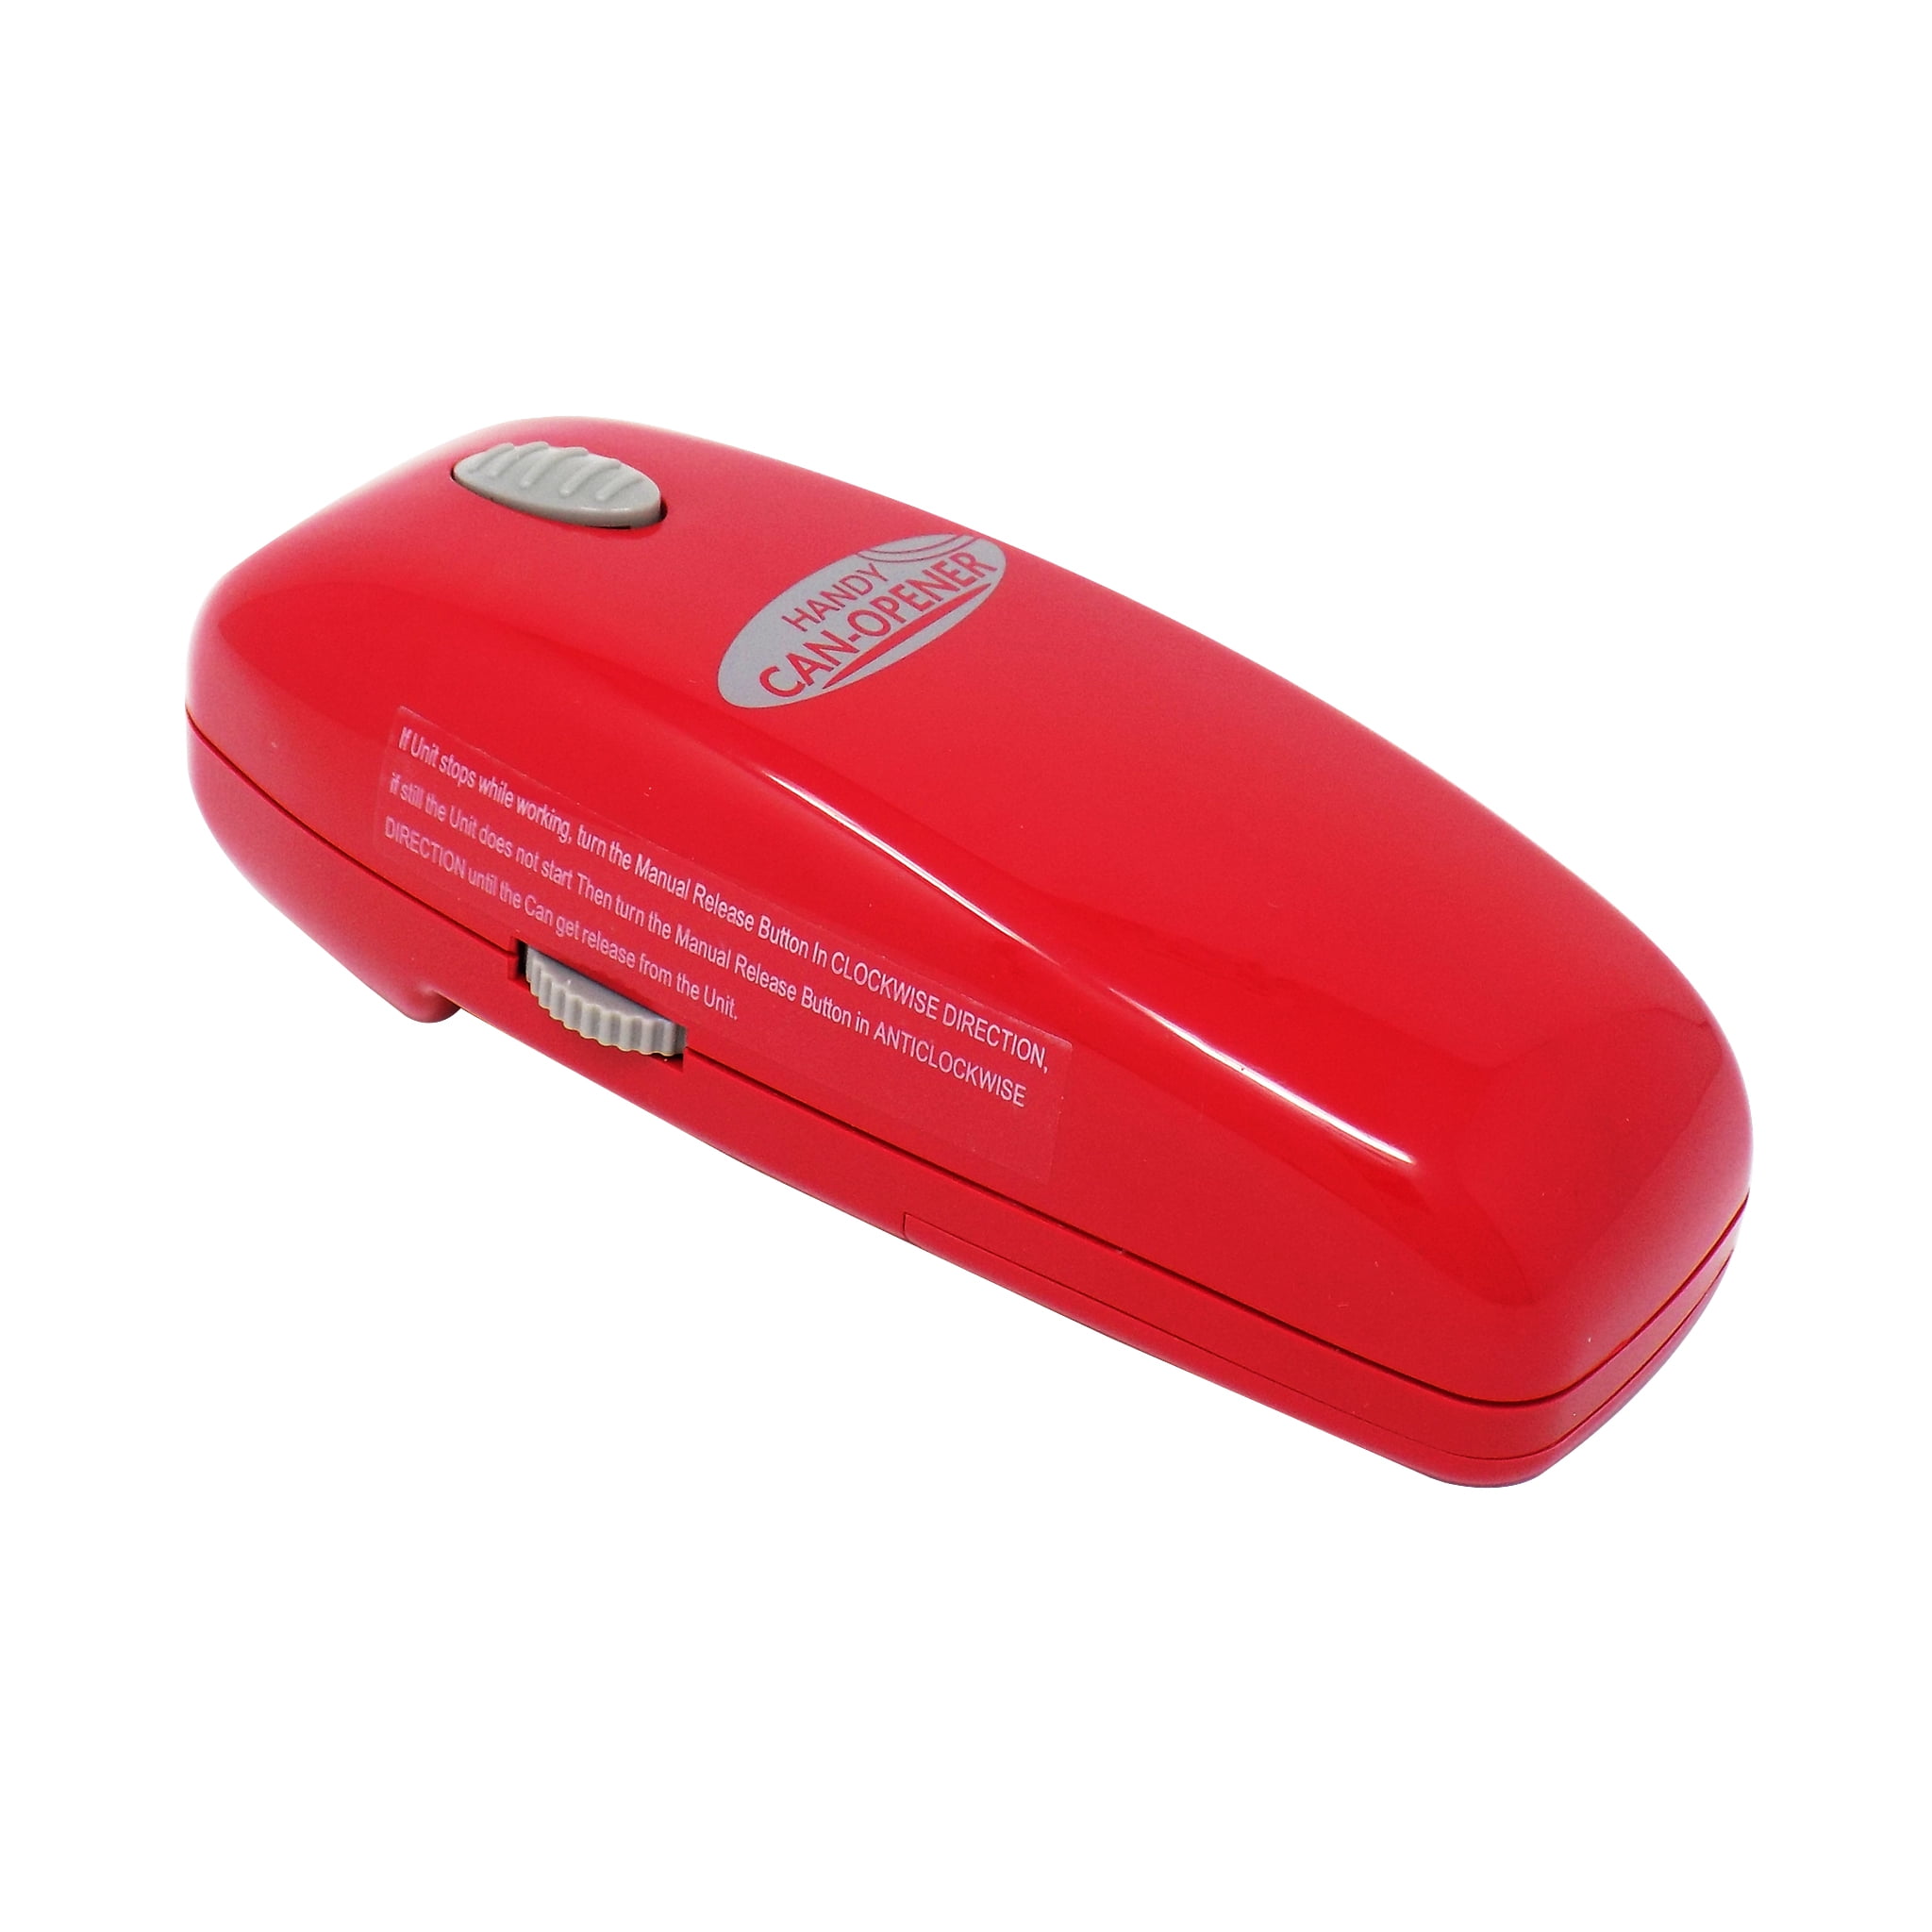 One Touch Hands Free Automatic Can Opener- Red, Kitchen Accessories:  Maxi-Aids, Inc.